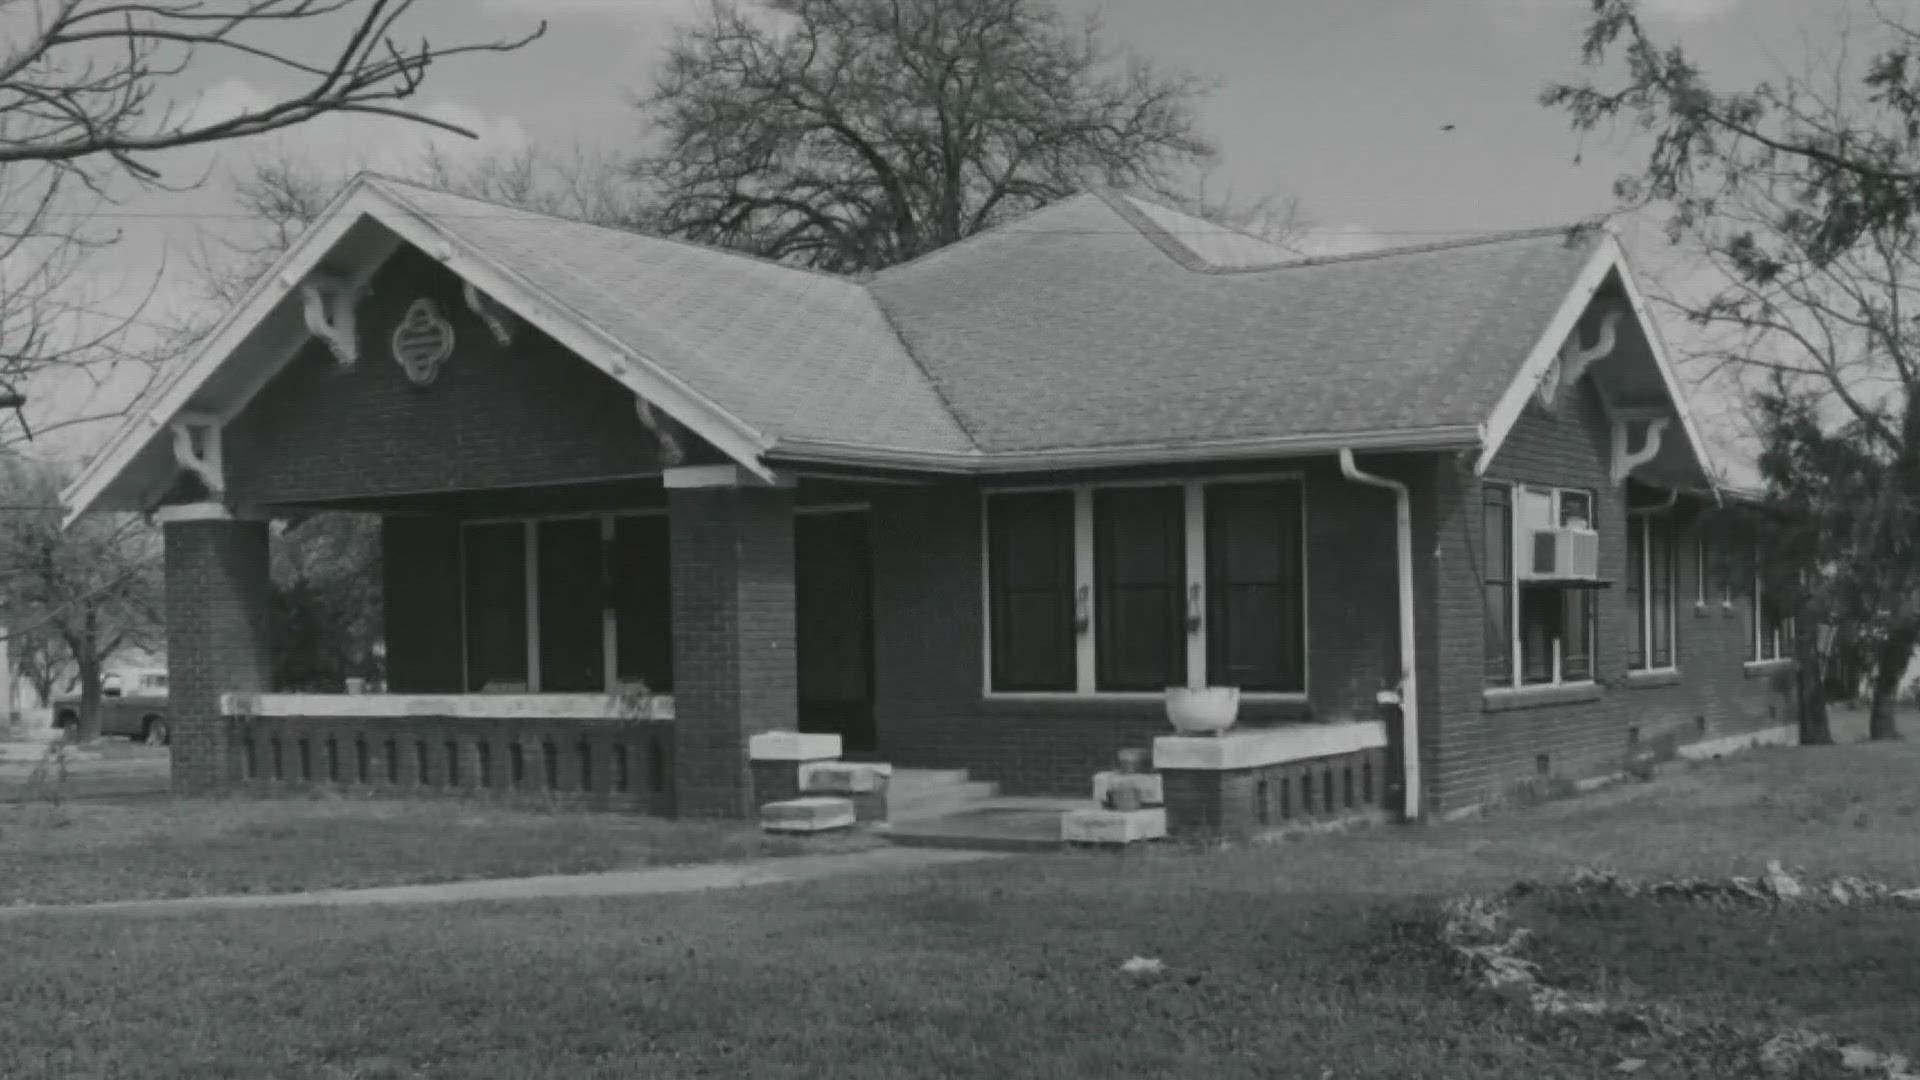 The L.B. Kinchion home in Belton, Texas was once a safe haven for Black celebrities.